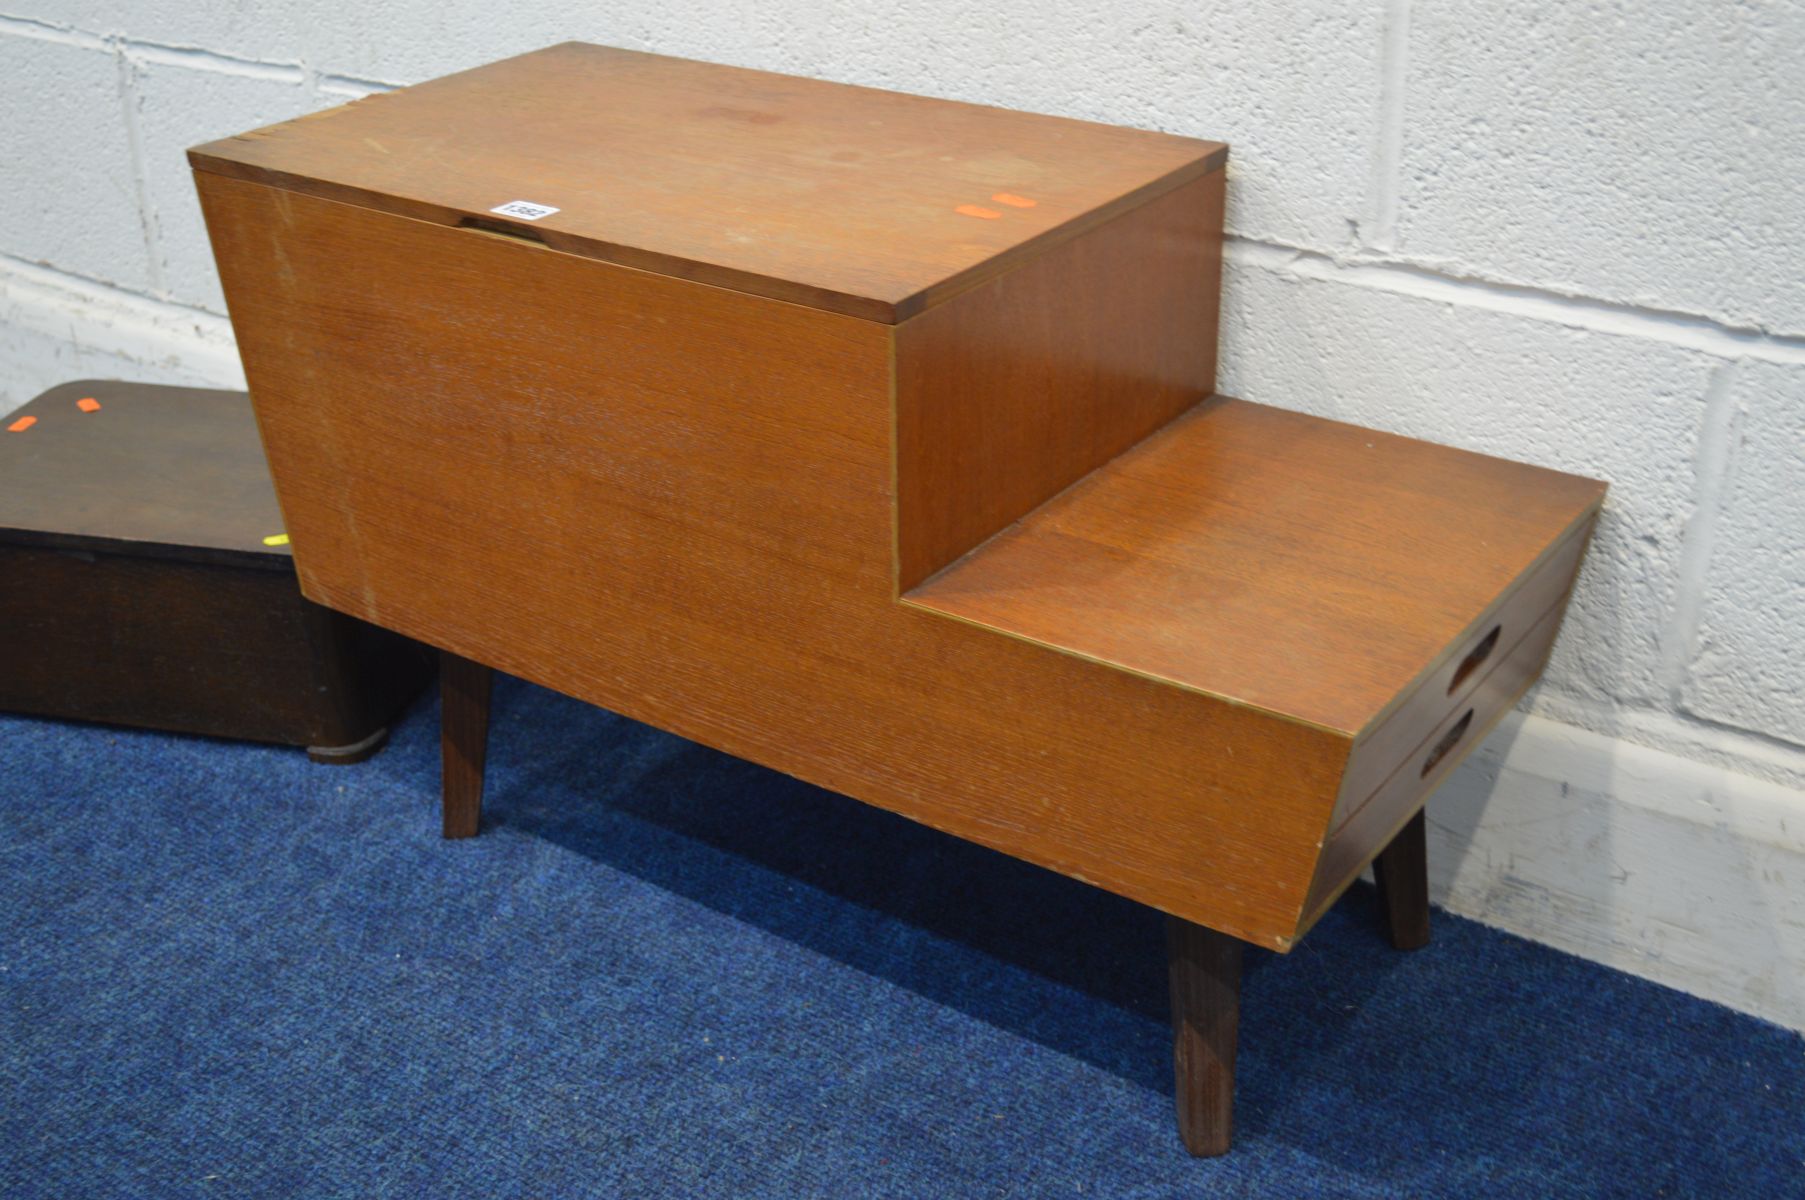 A MID 20TH CENTURY TEAK STEPPED WORK/SEWING BOX with two drawers (minor veneer damage) together with - Image 2 of 5